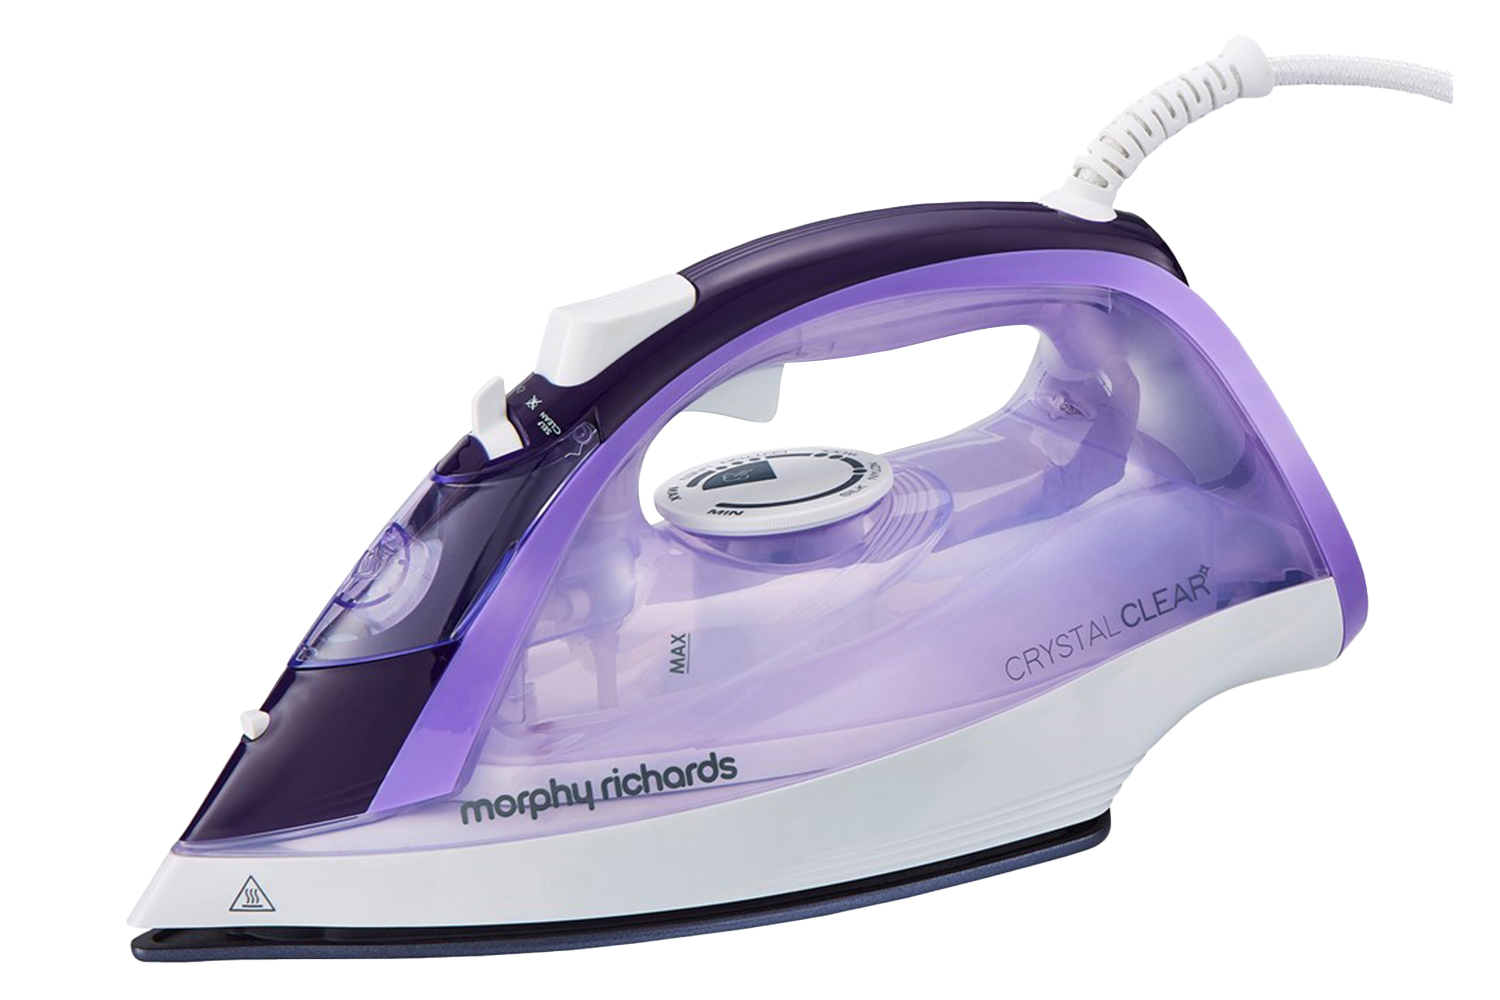 Amethyst Morphy Richards Morphy Richards 300301 Steam Iron Crystal Clear Water Tank 2400 W 